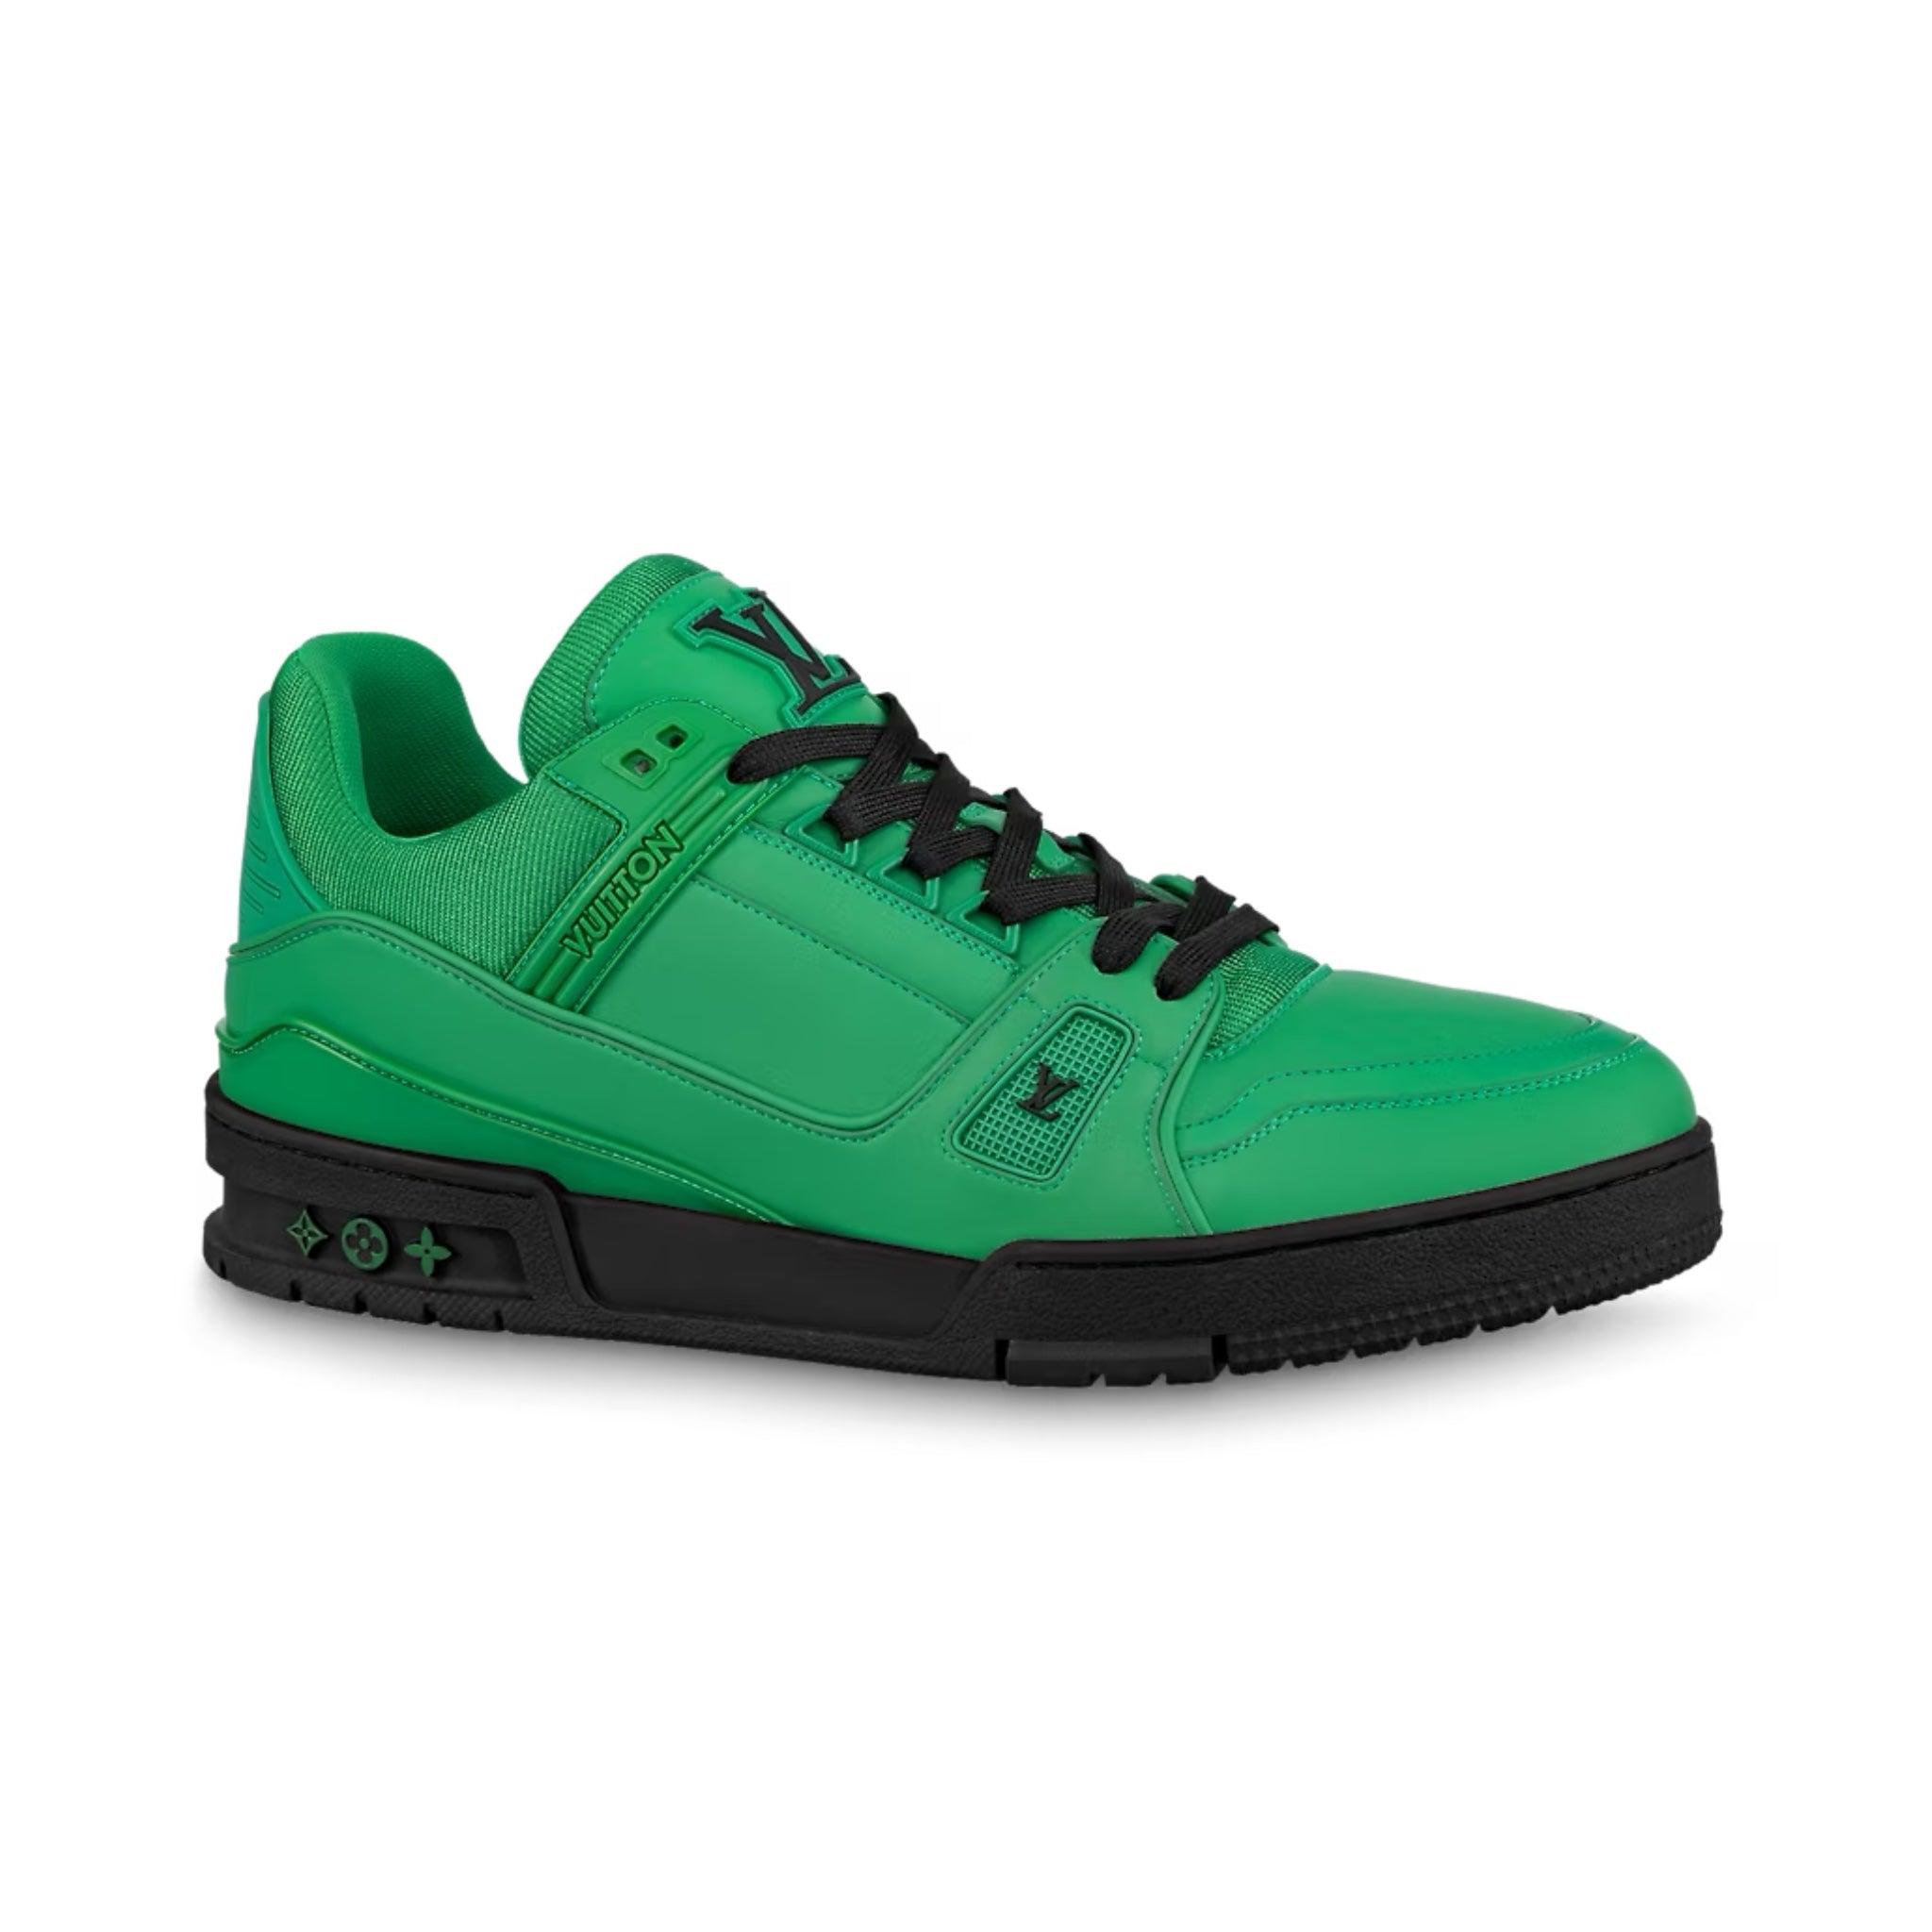 Size+9+-+Louis+Vuitton+LV+Trainer+Green for sale online